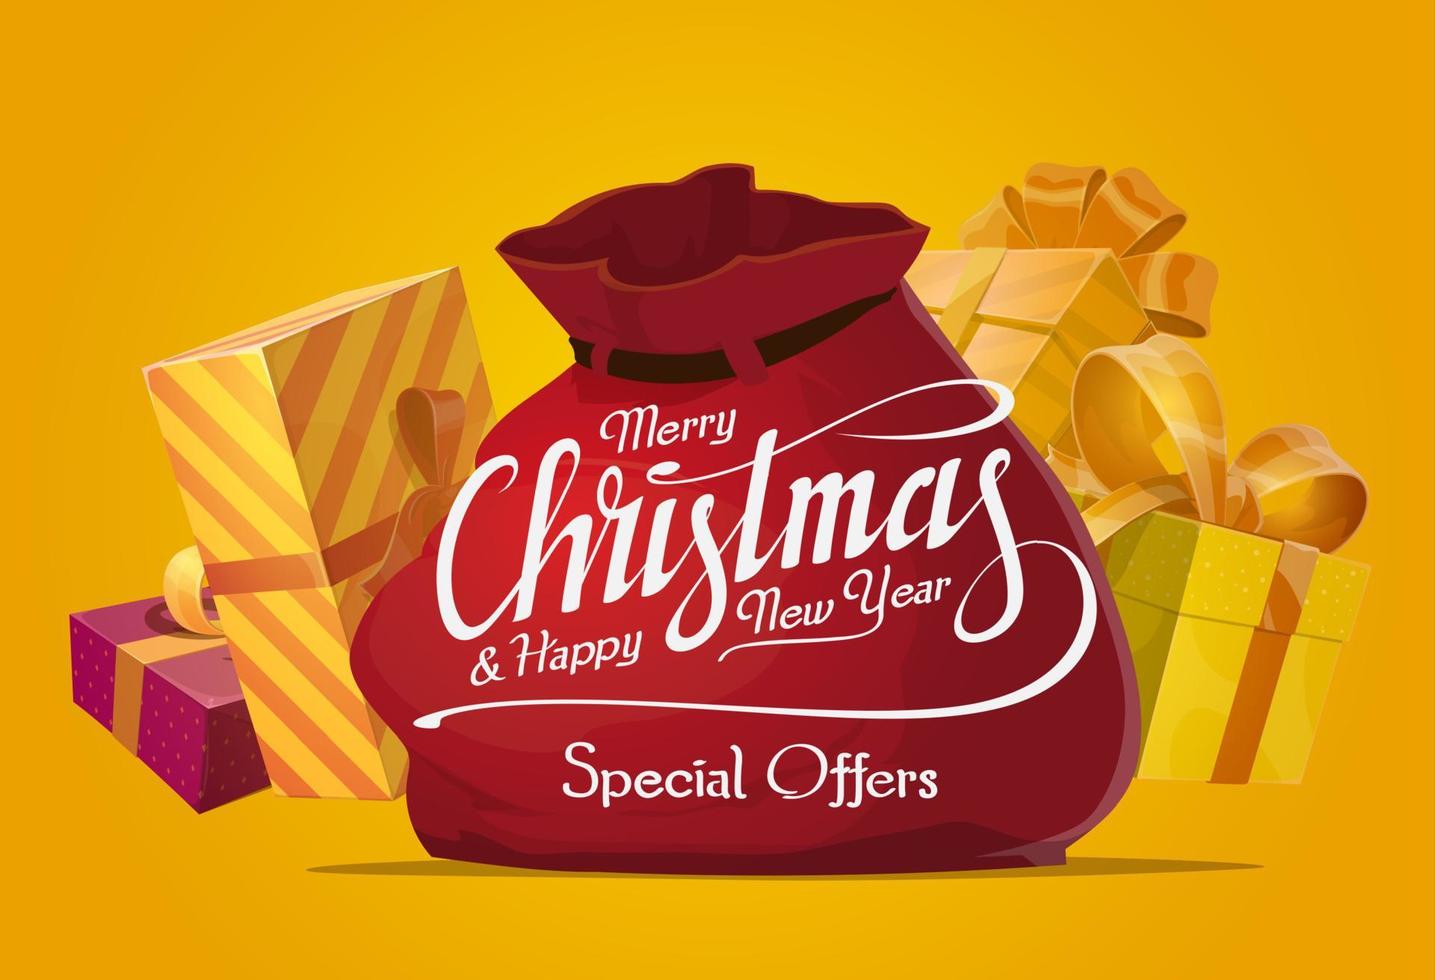 Christmas gifts and presents sale offer vector